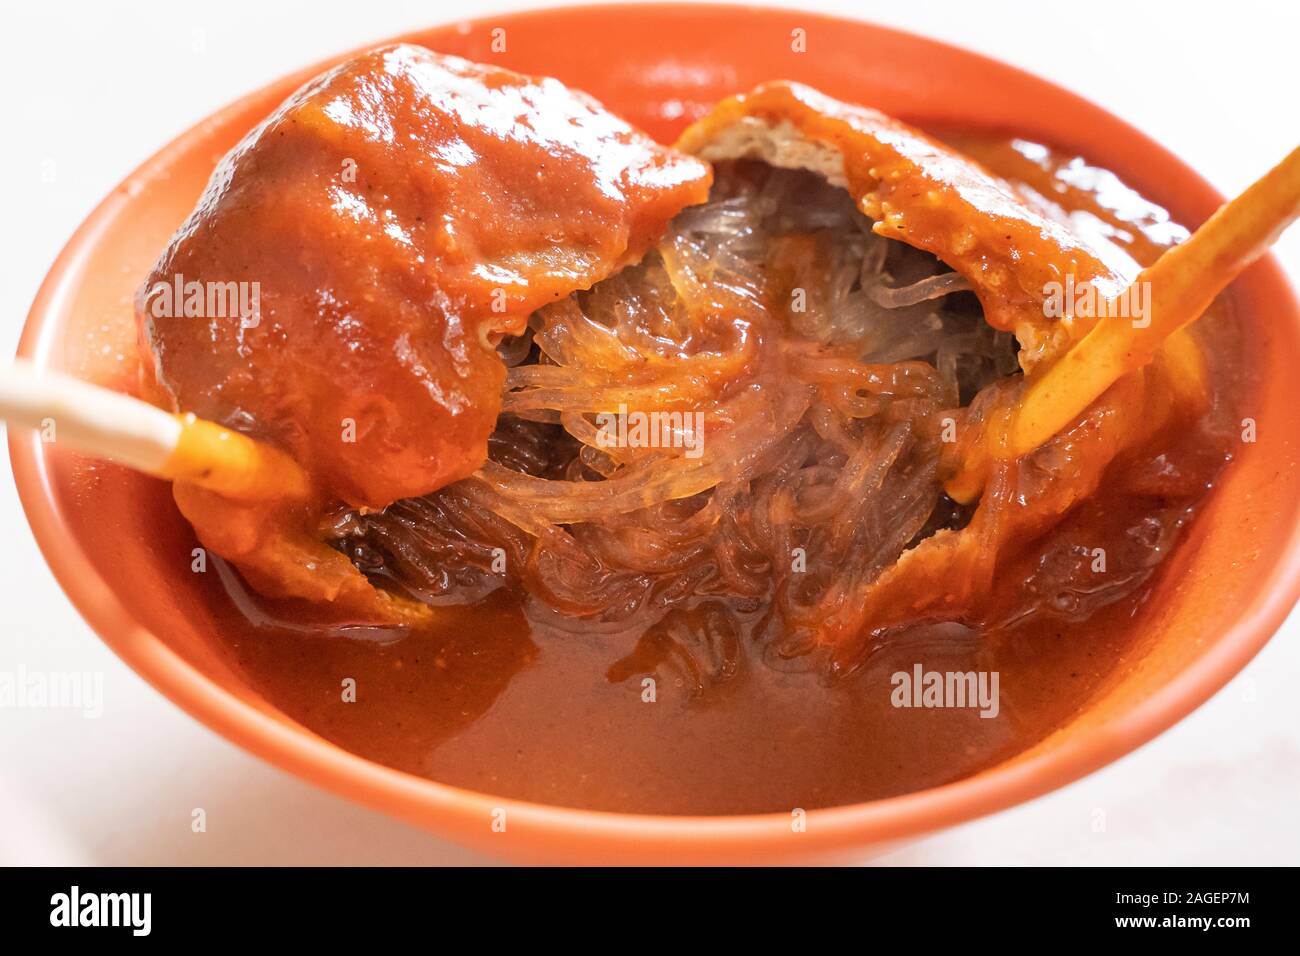 Tamsui agei (age, aburaage), delicious famous street food in Taipei, Taiwan, stuffed with mung bean noodles and chili sauce topping, lifestyle, close Stock Photo